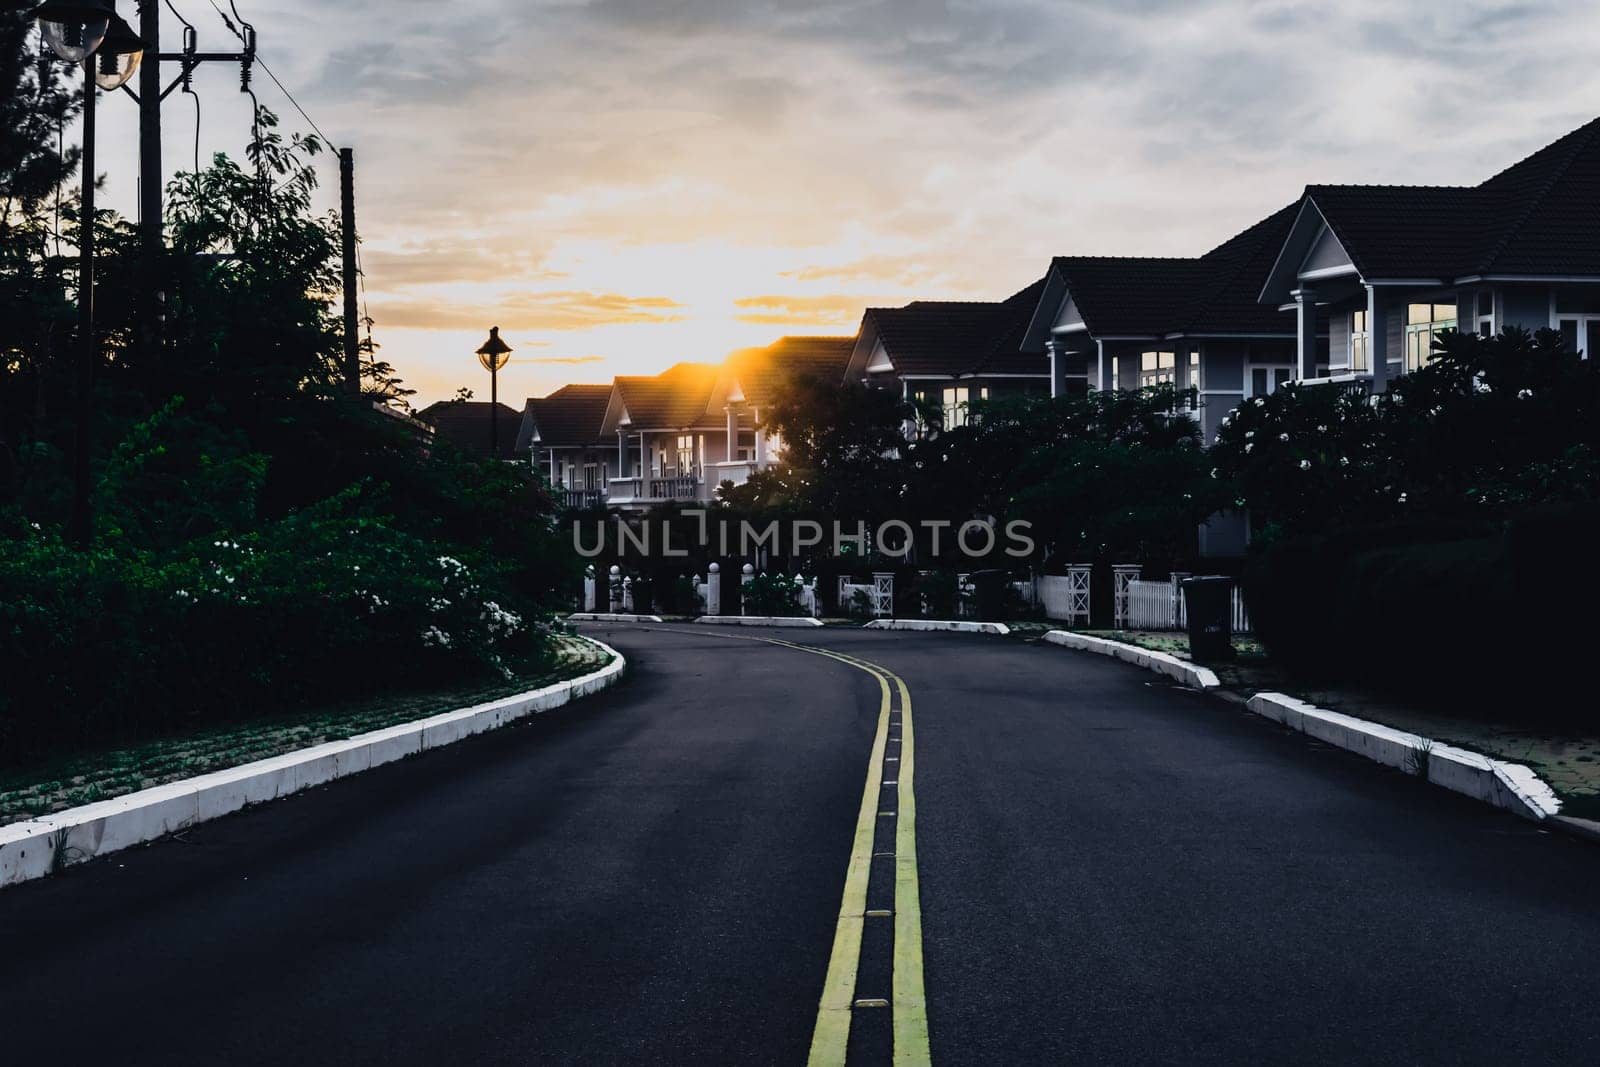 Modern cottages row road sidewalk two story buildings residential villas village New Estate Reflection dawn Sun in windows.